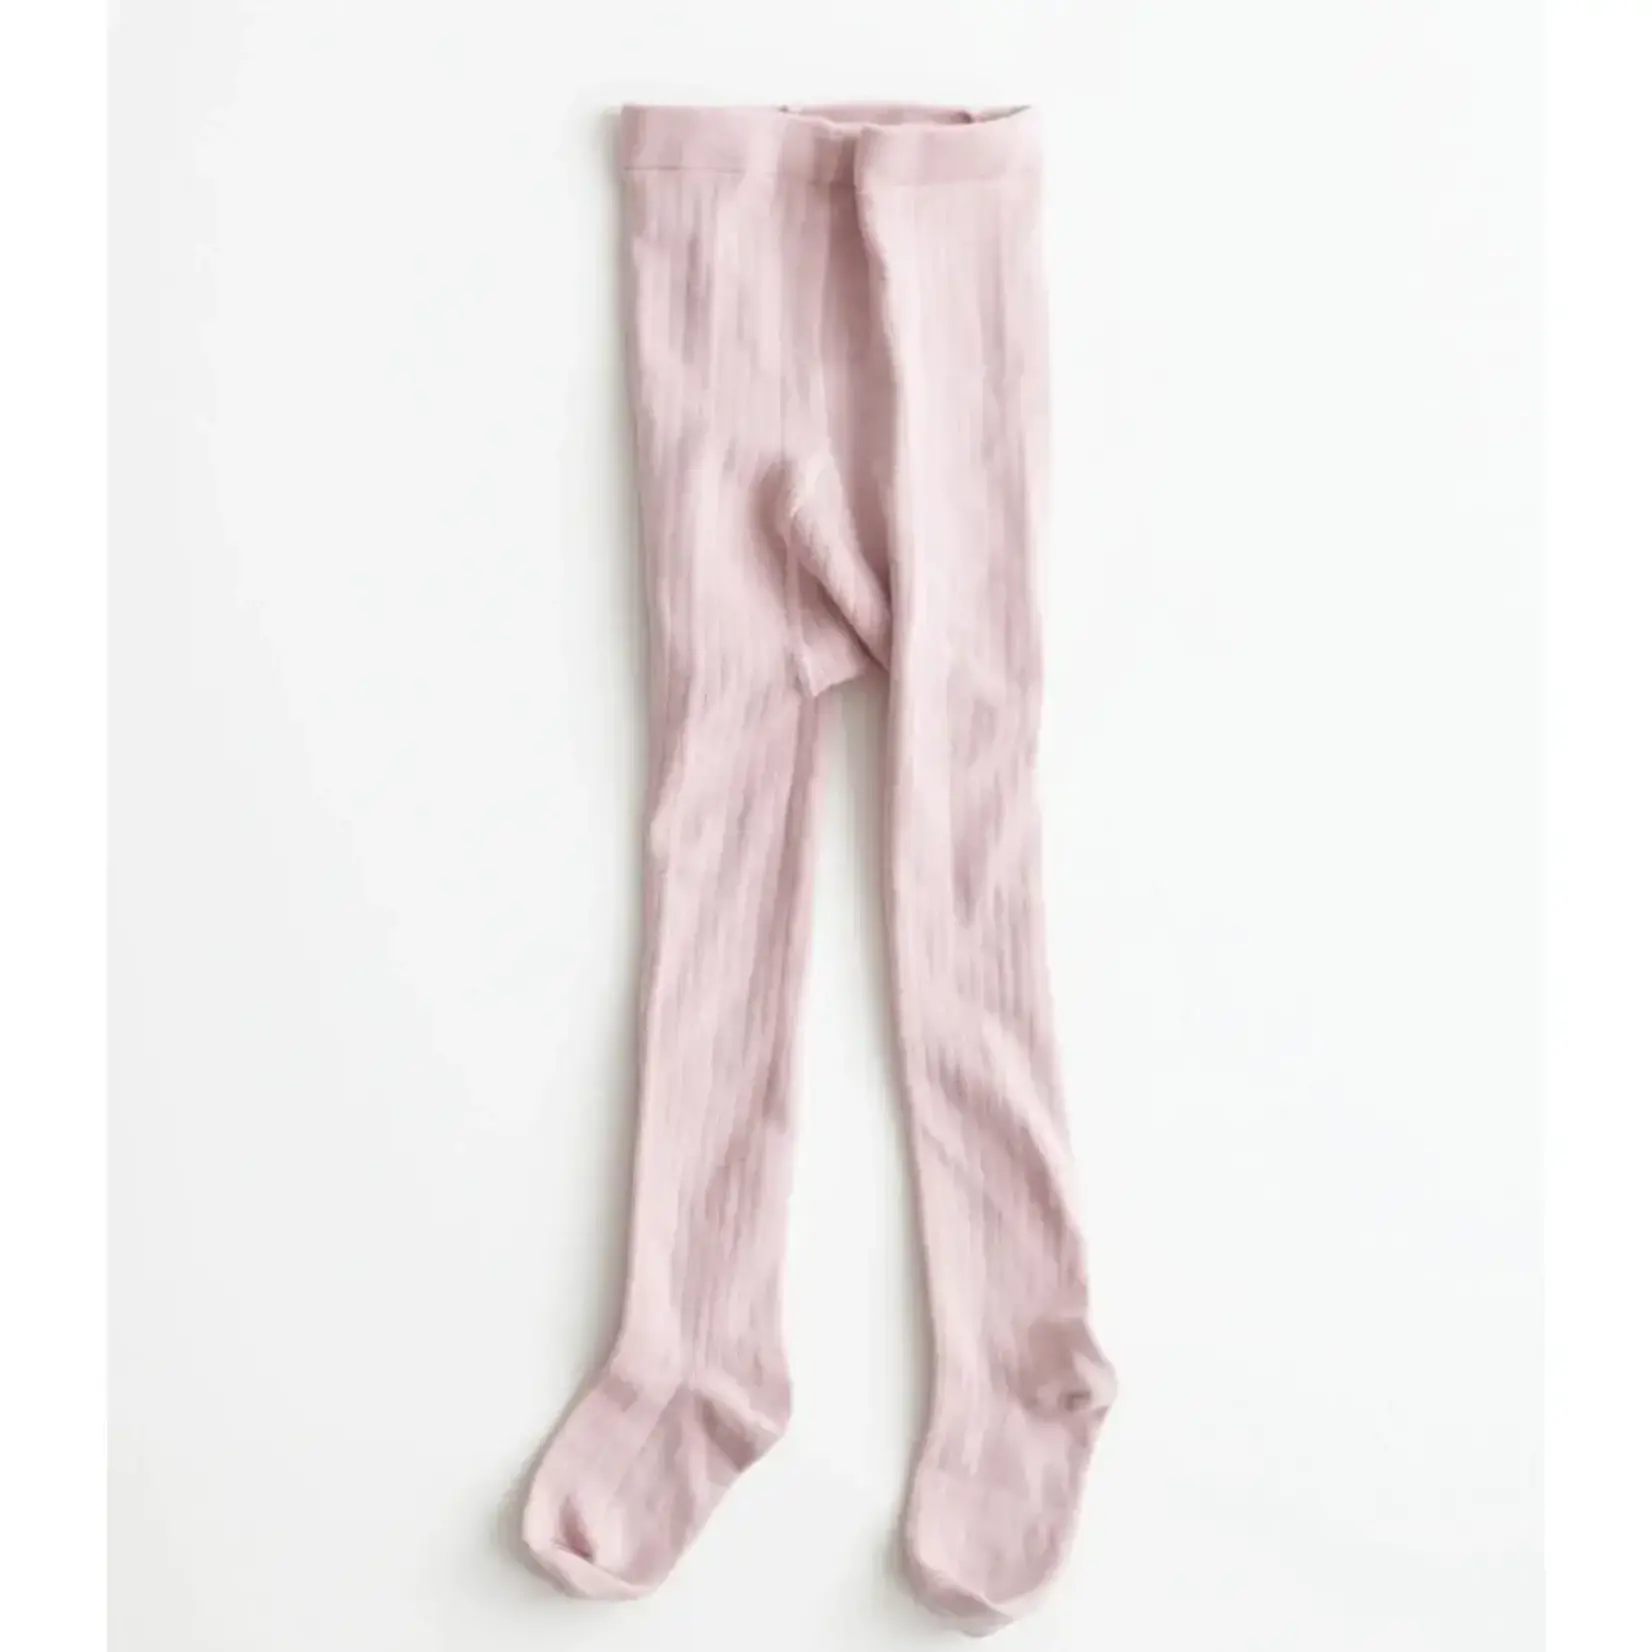 Lali Cotton Tights - Pink - 24M